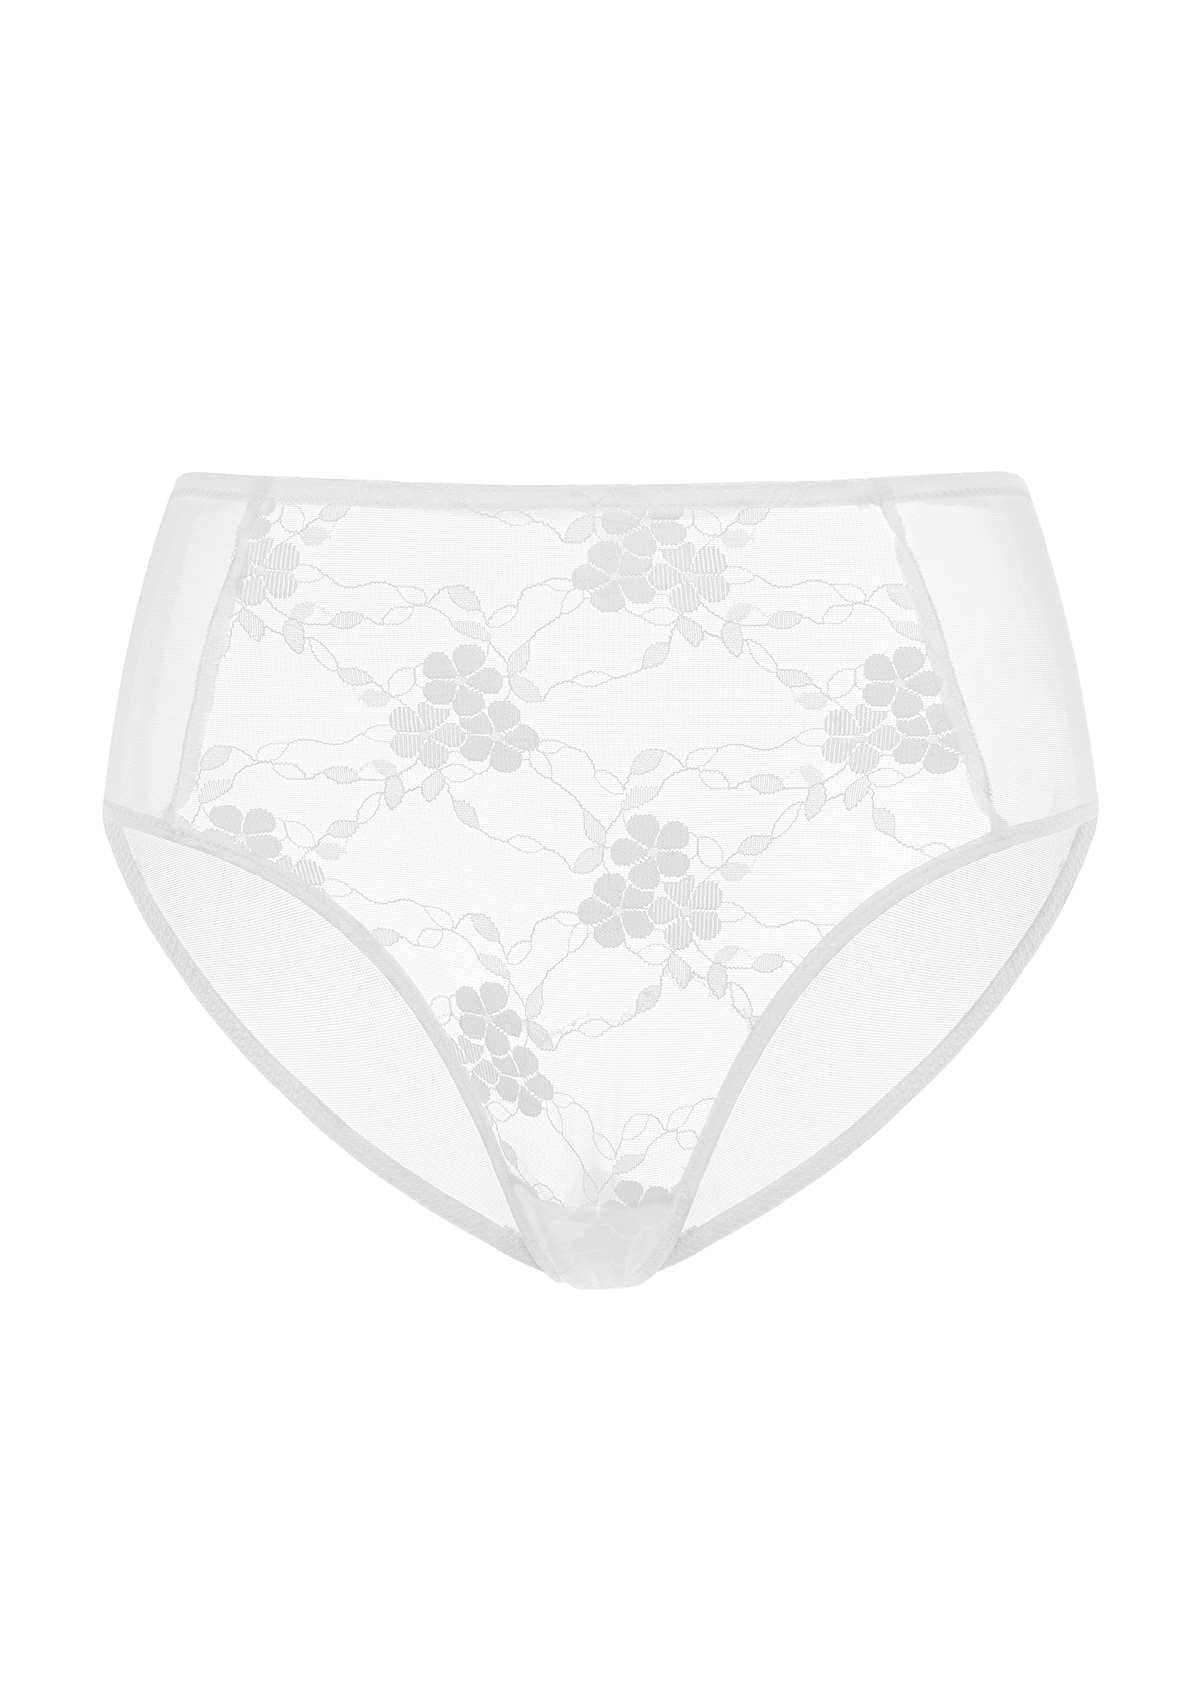 HSIA Spring Romance High-Rise Floral Lacy Panty-Comfort In Style - XL / White